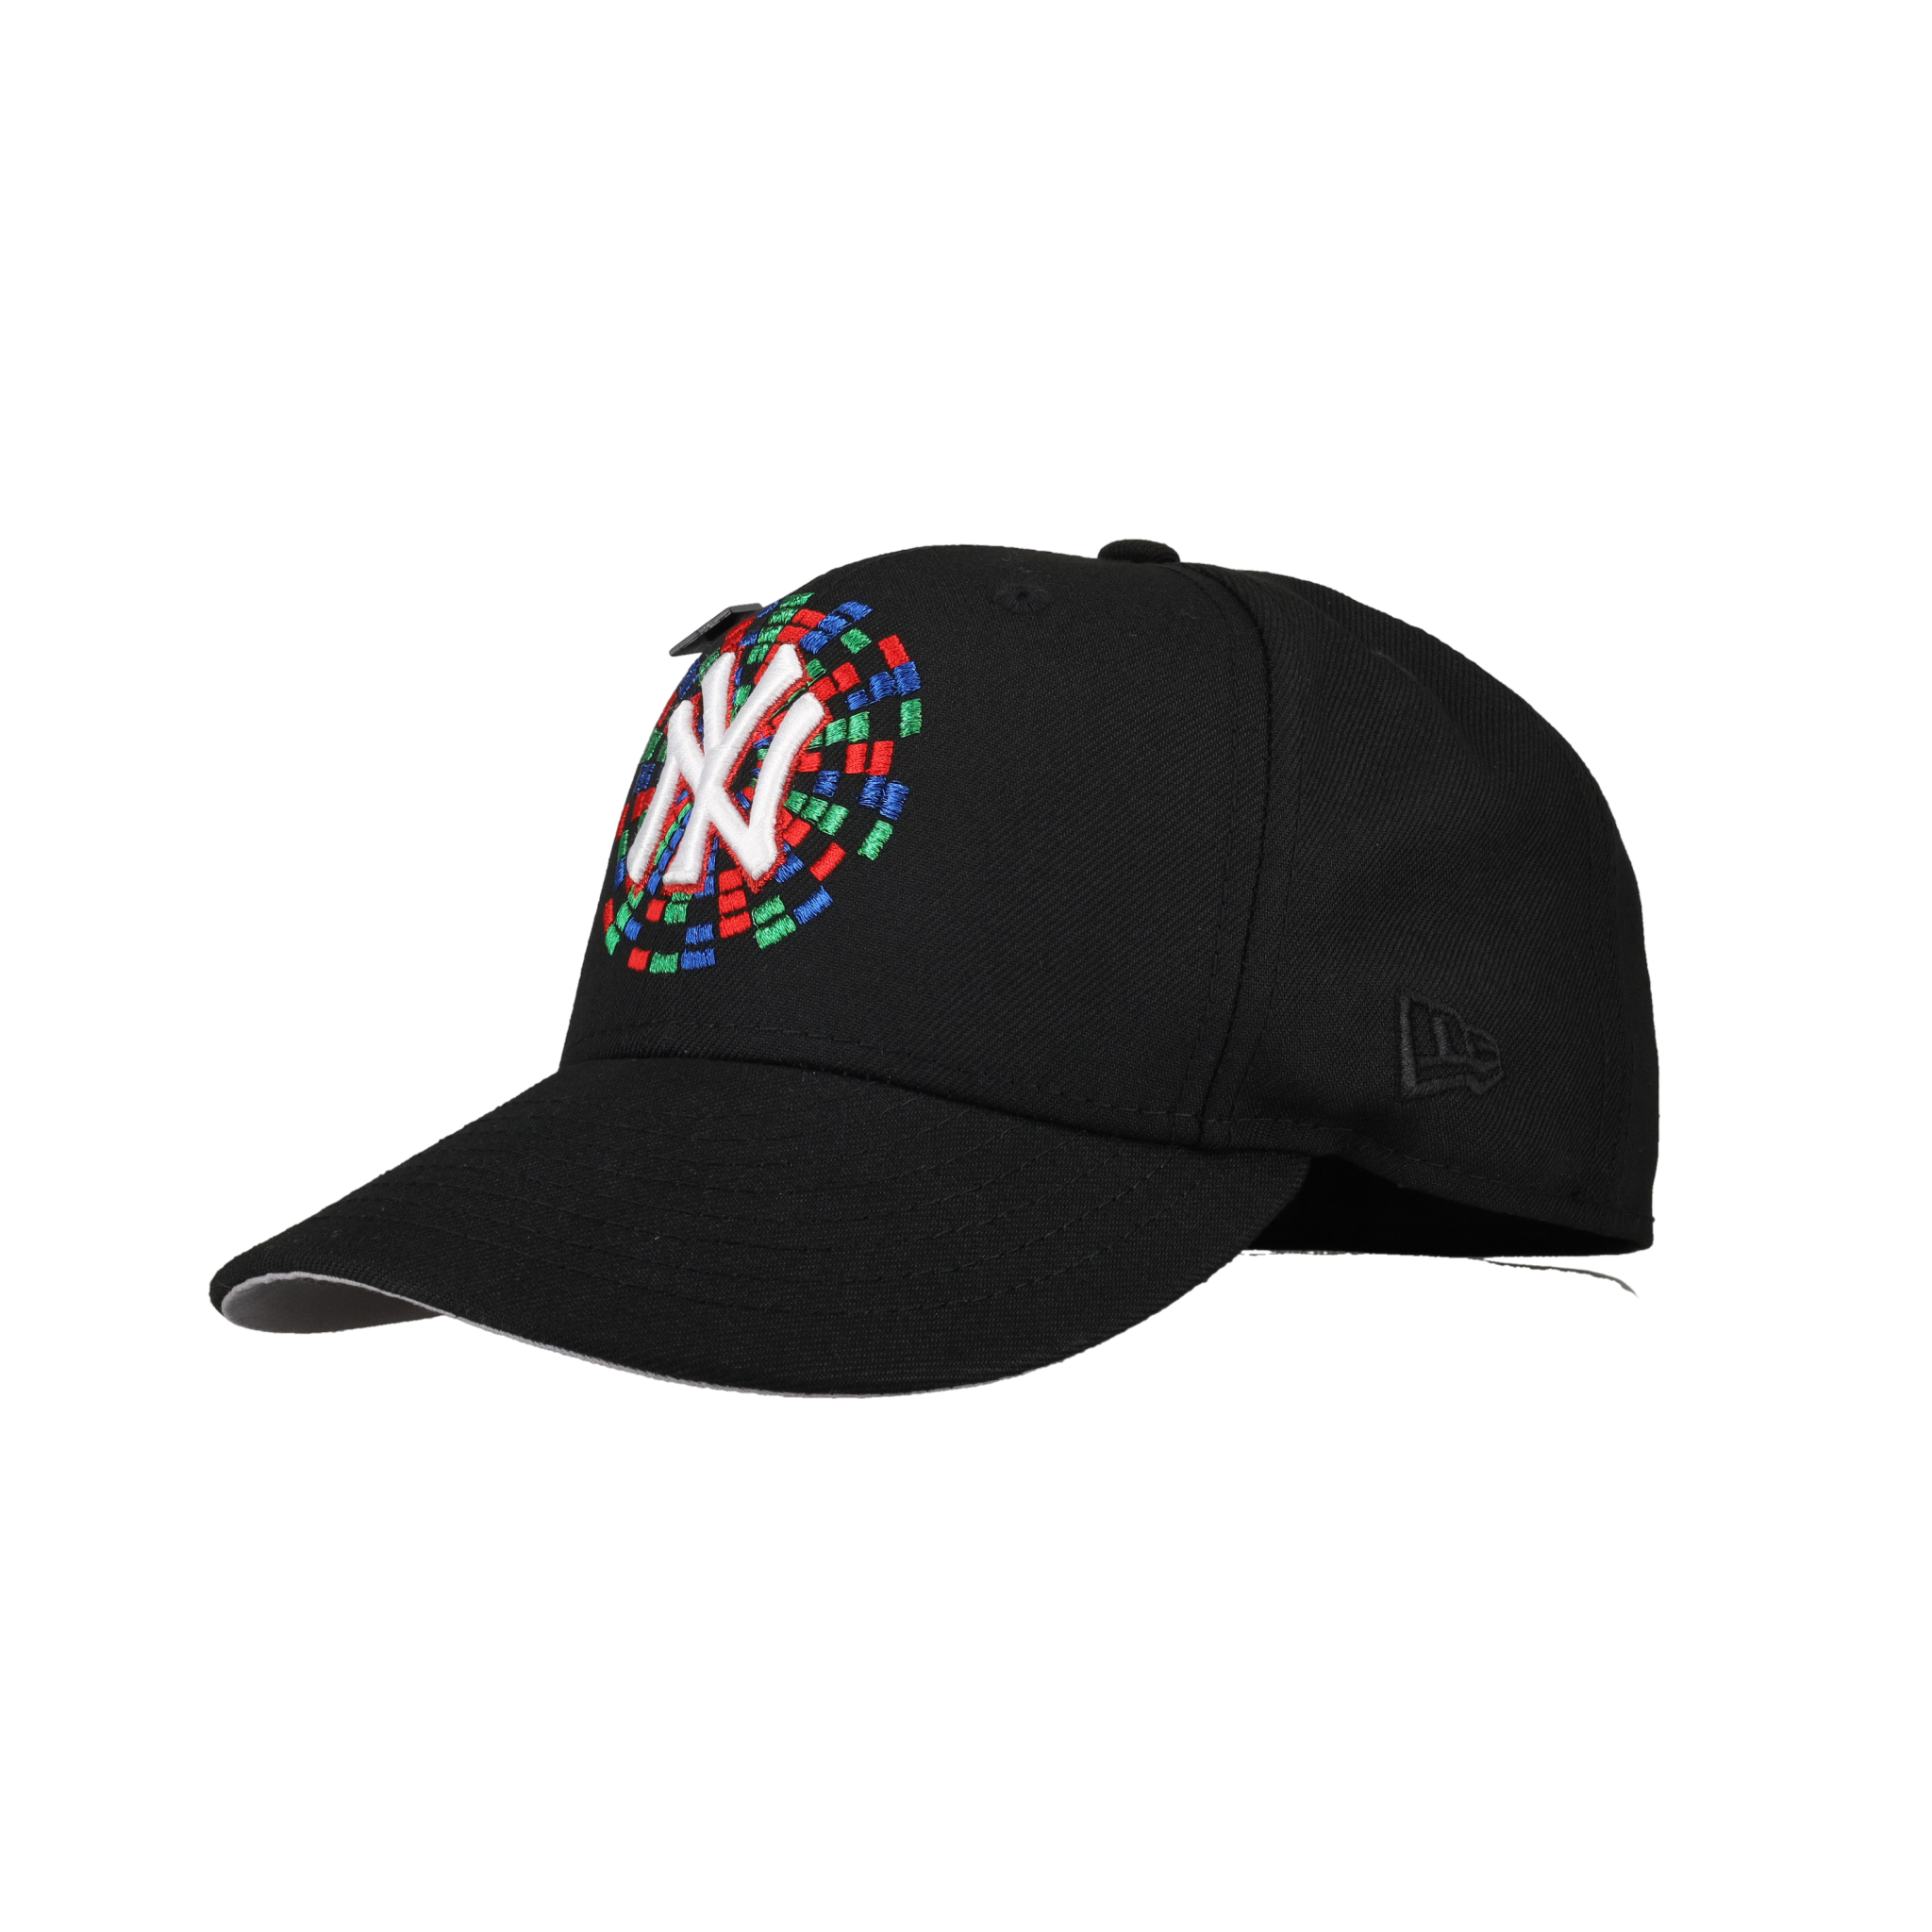 New York Yankees Black 1999 World Series Patch Fitted Hat